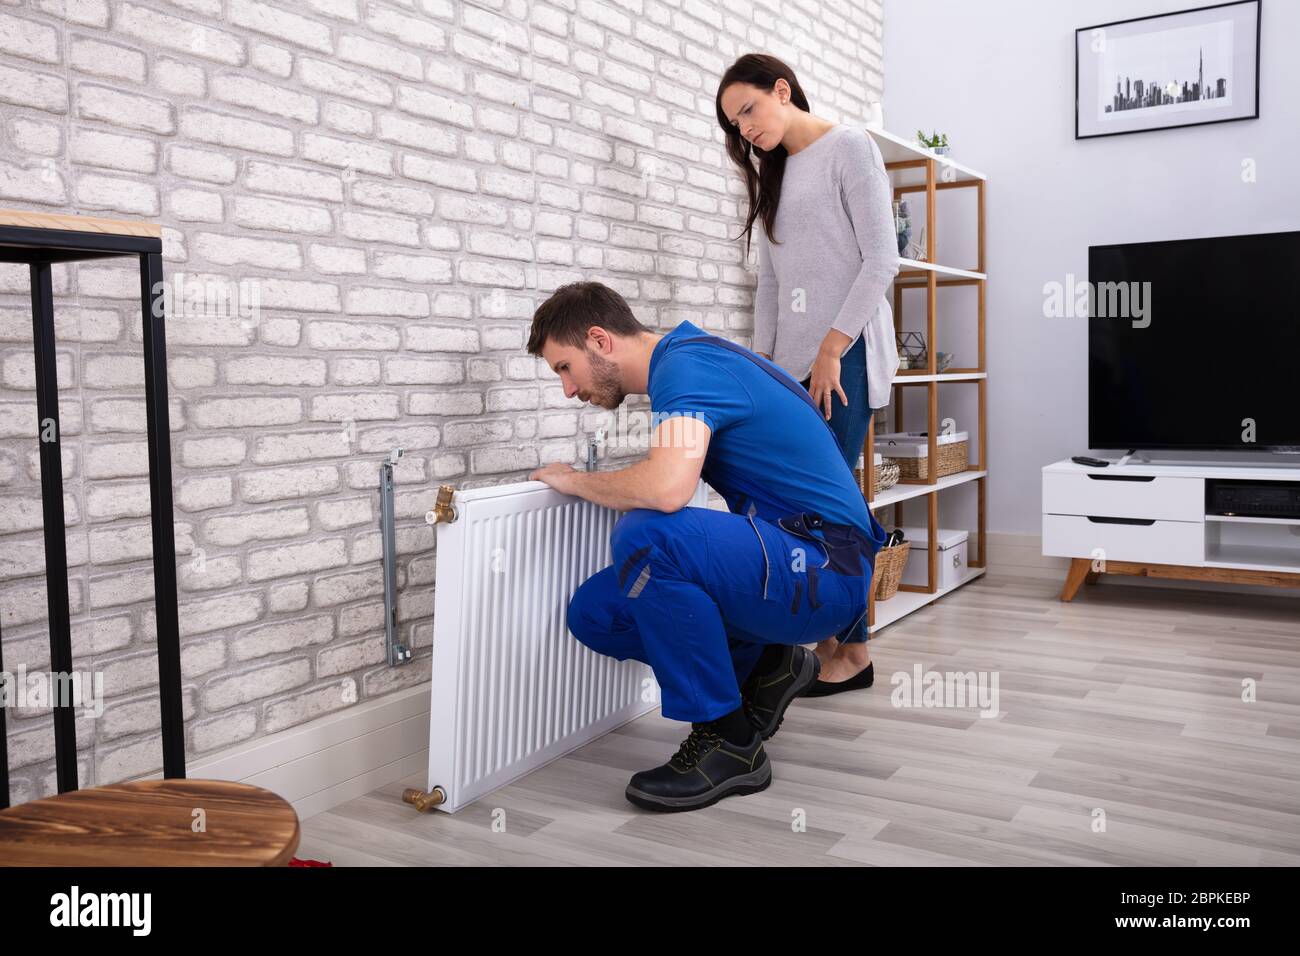 Young Repairman Installing Radiator On Brick Wall With Woman Standing At Home Stock Photo